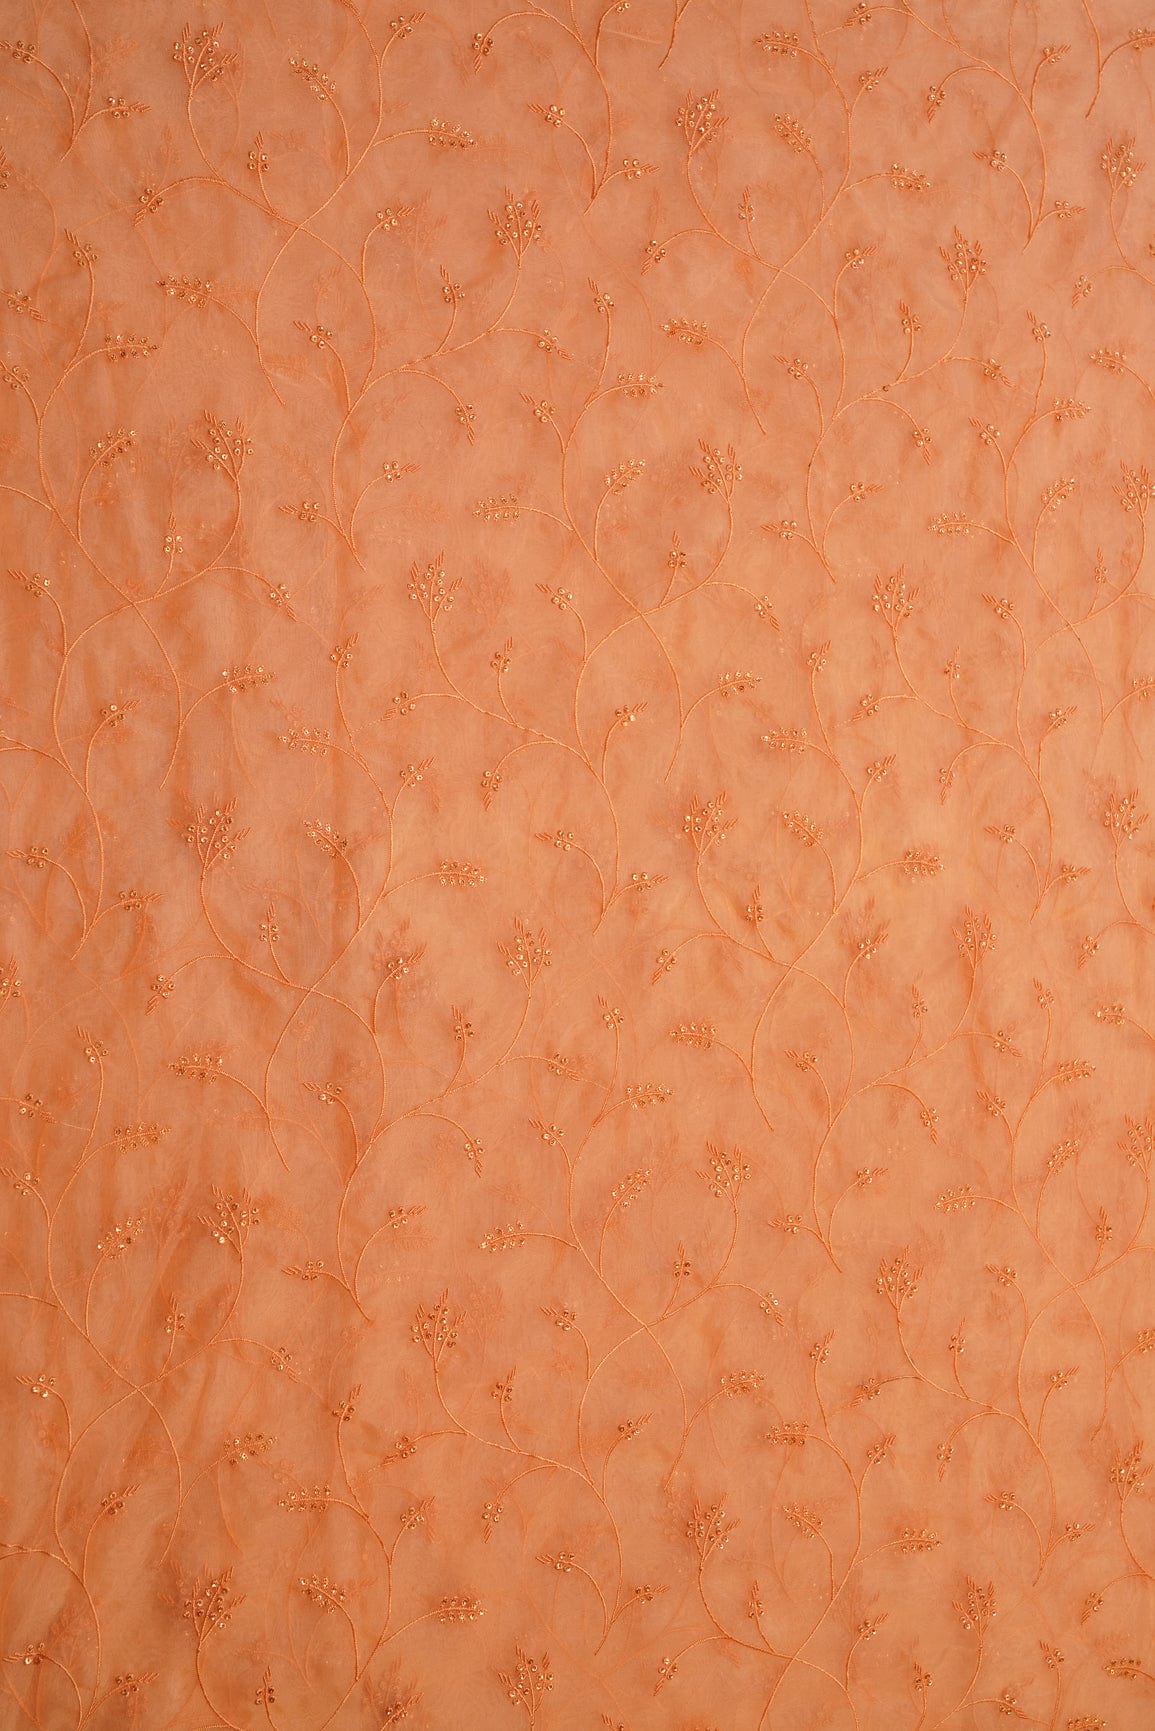 doeraa Embroidery Fabrics Gold Sequins With Peach Thread Floral Embroidery On Peach Organza Fabric